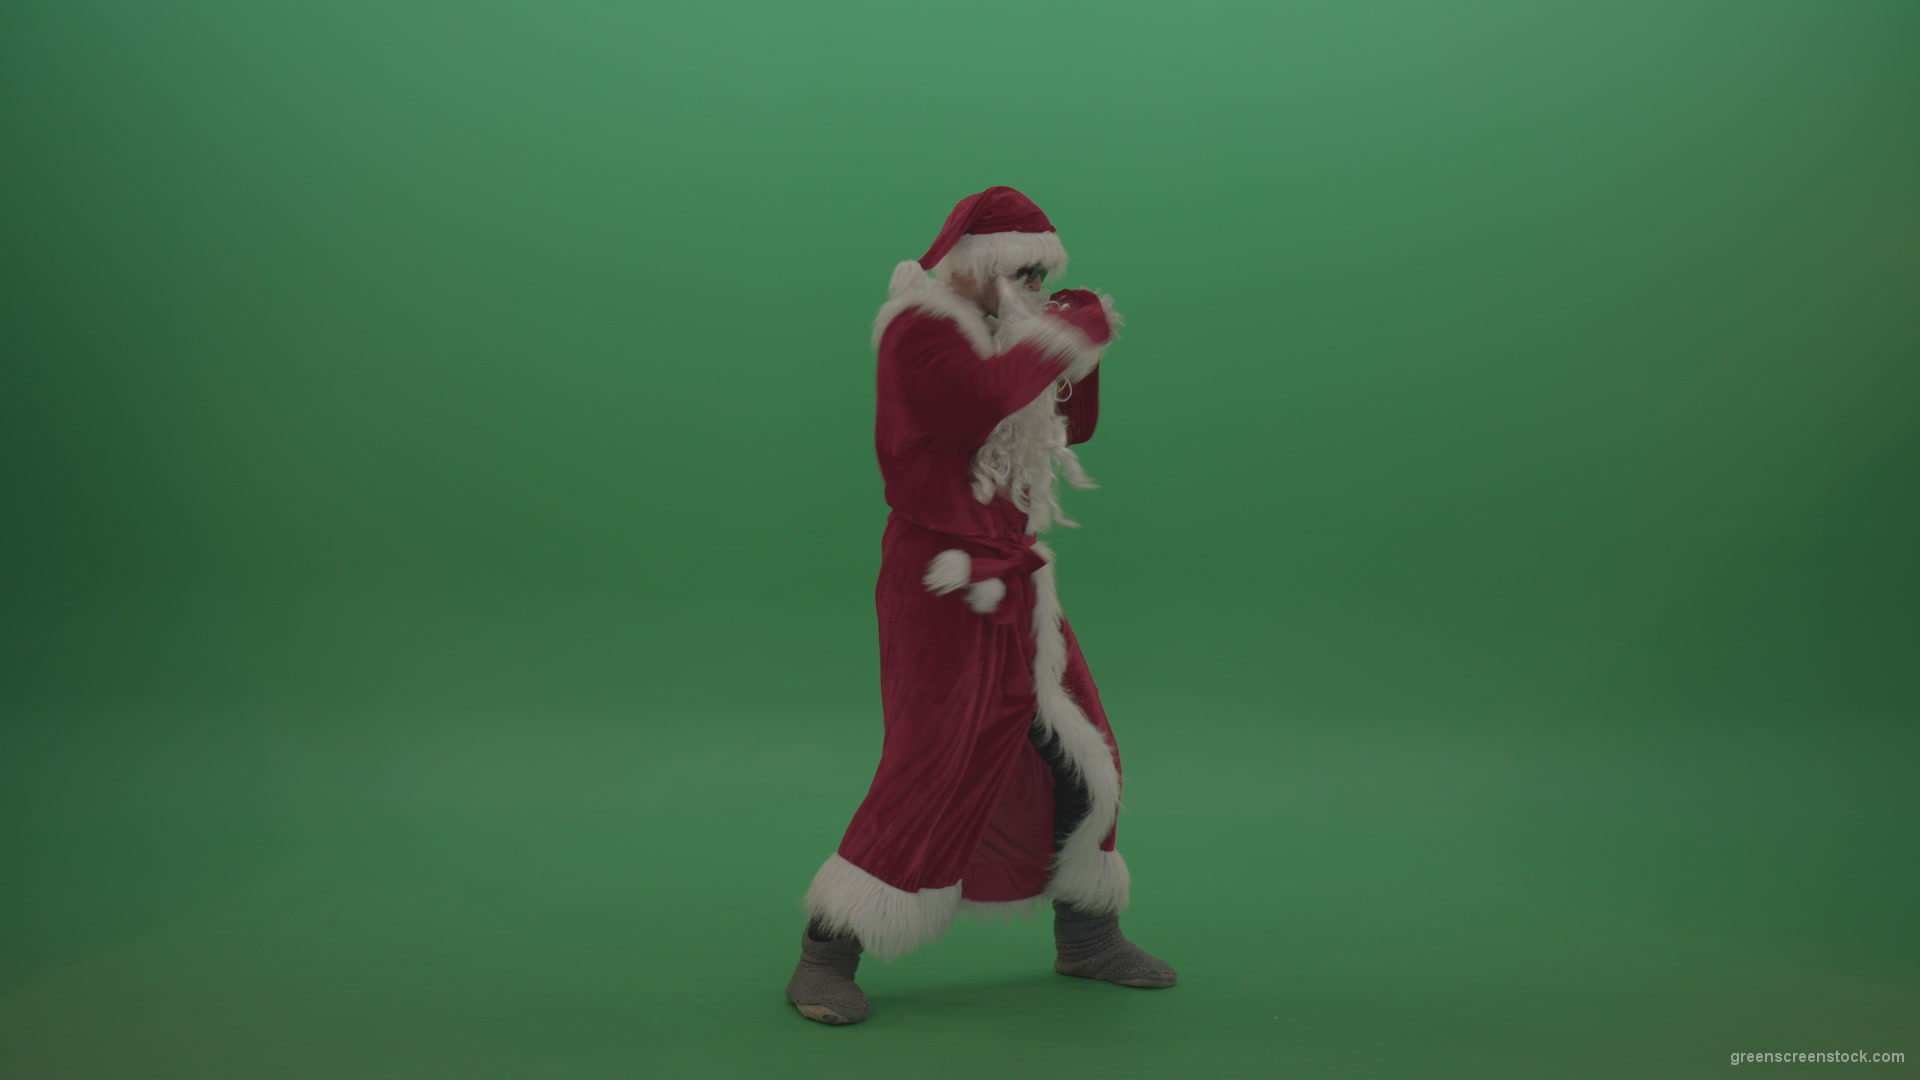 Santa-in-black-glasses-show-cases-his-boxing-skills-over-chromakey-background_007 Green Screen Stock